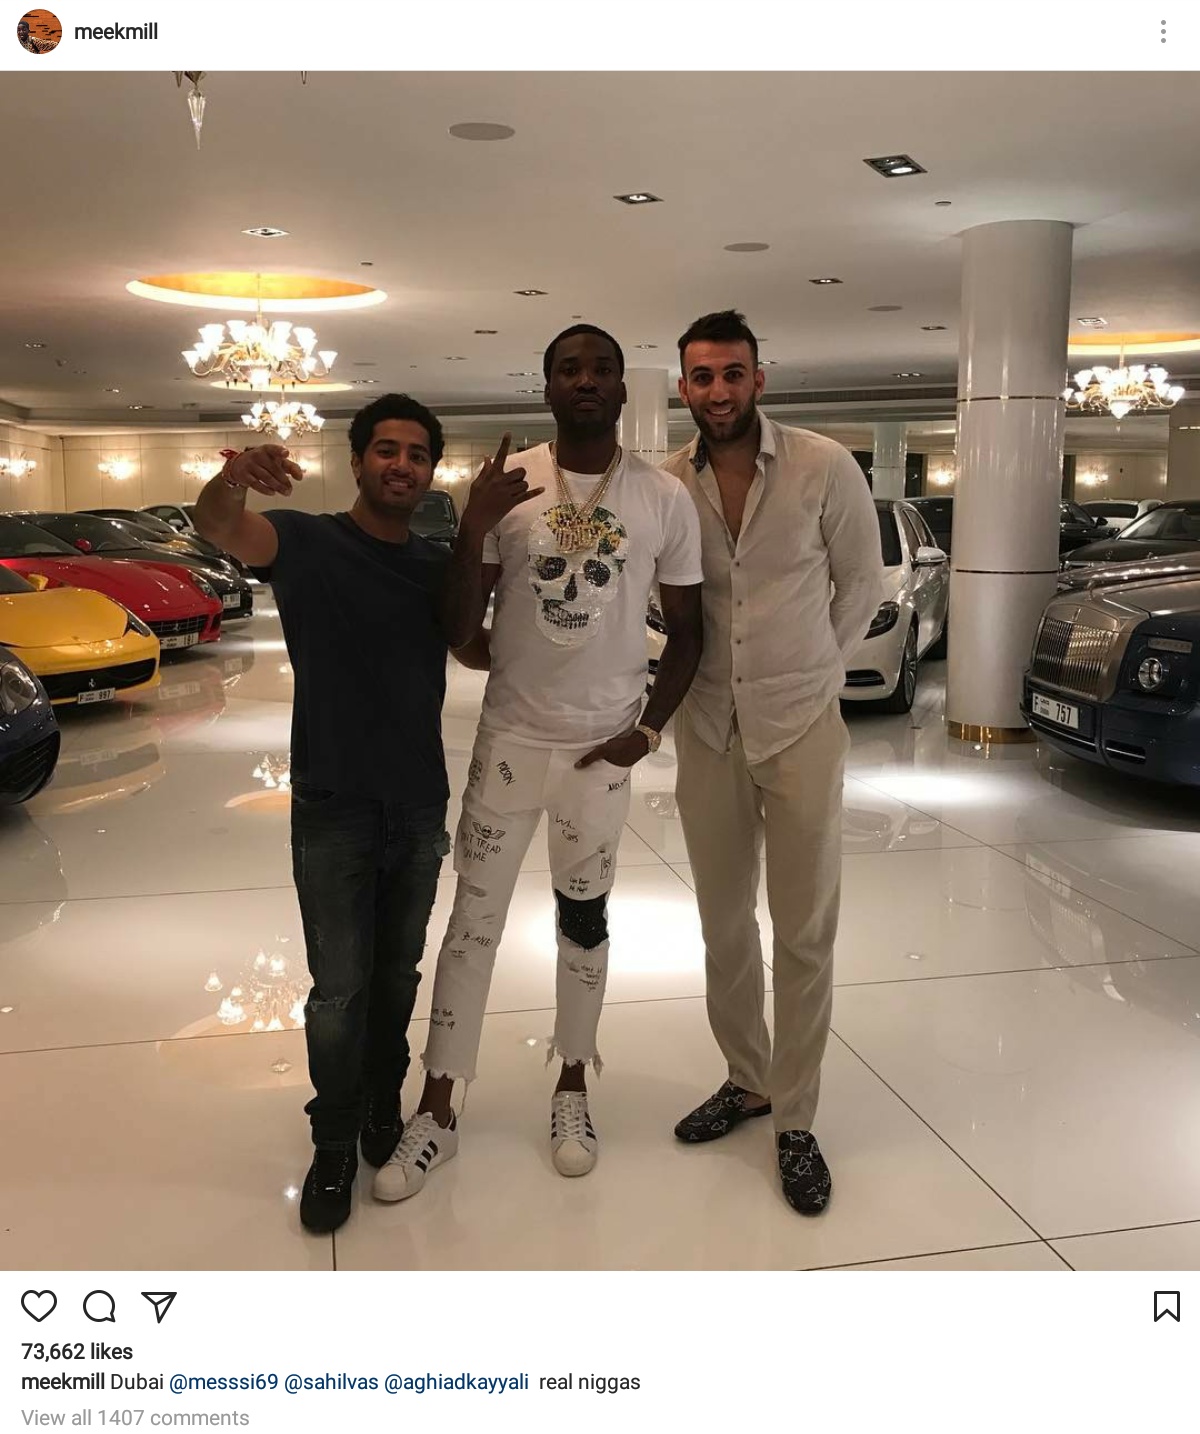 Internet Has Come For Meek Mill Over This Pair Of White Jeans 2